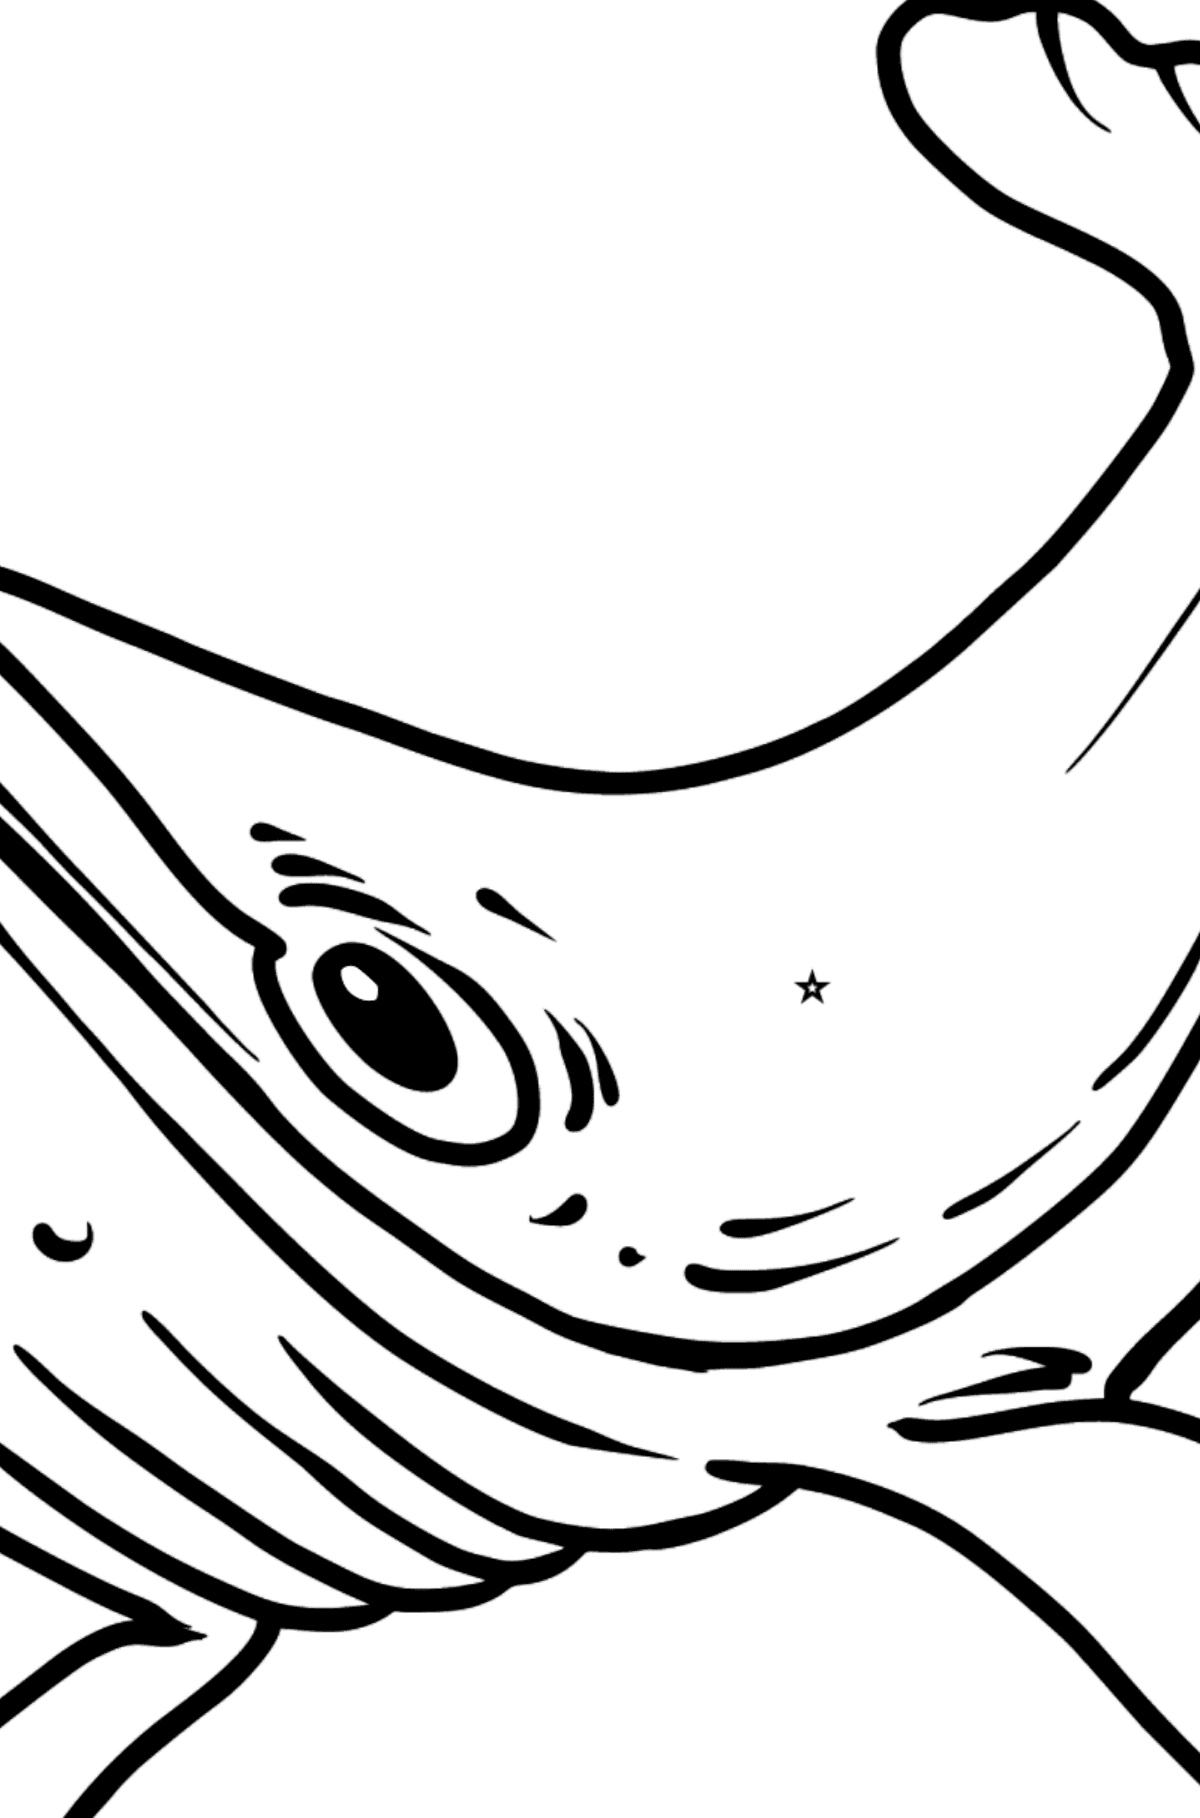 Whale coloring page - Coloring by Geometric Shapes for Kids